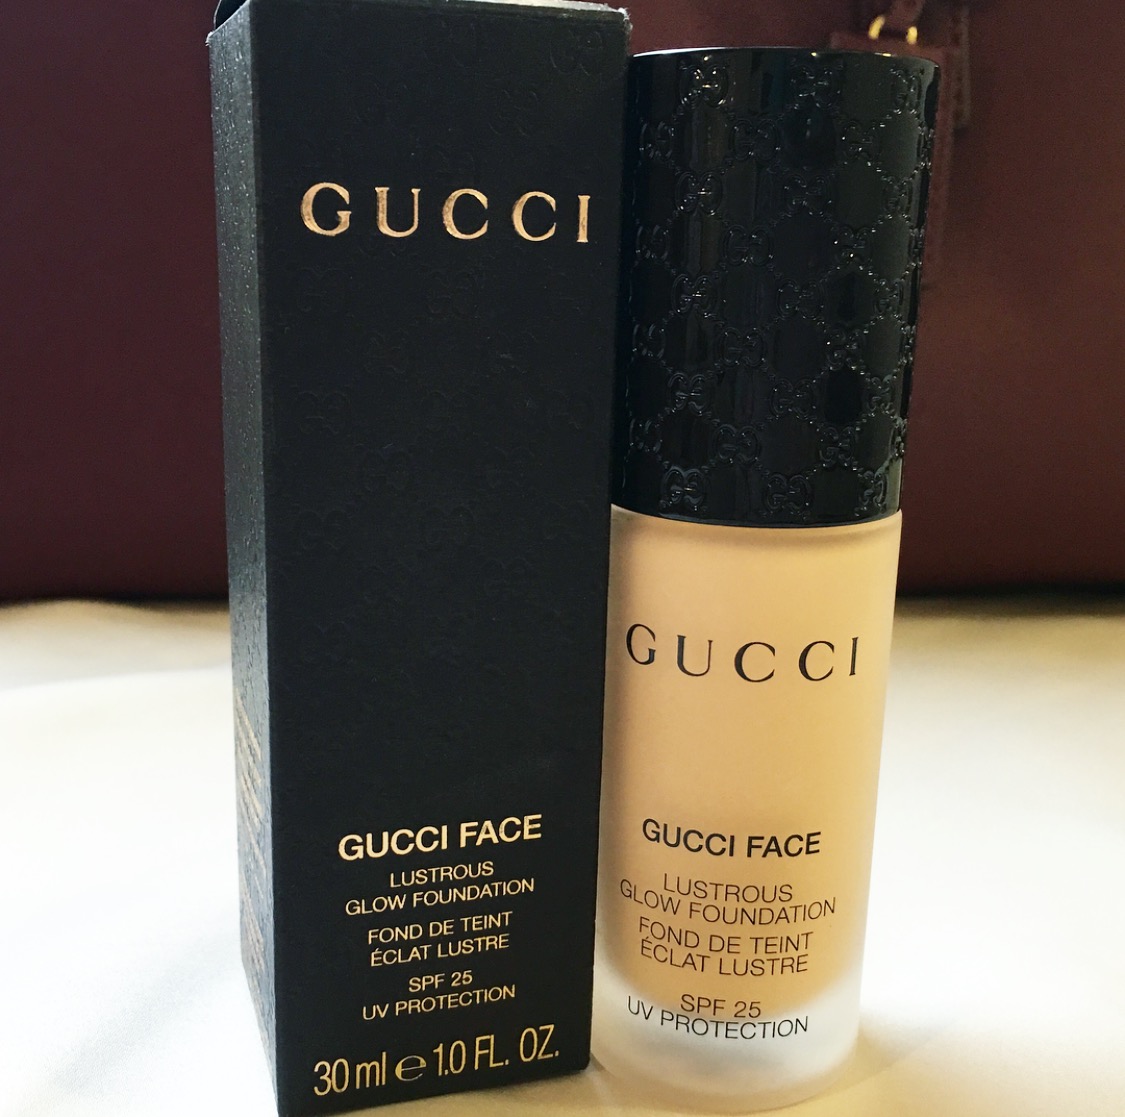 Gucci Face Lustrous Glow Foundation 